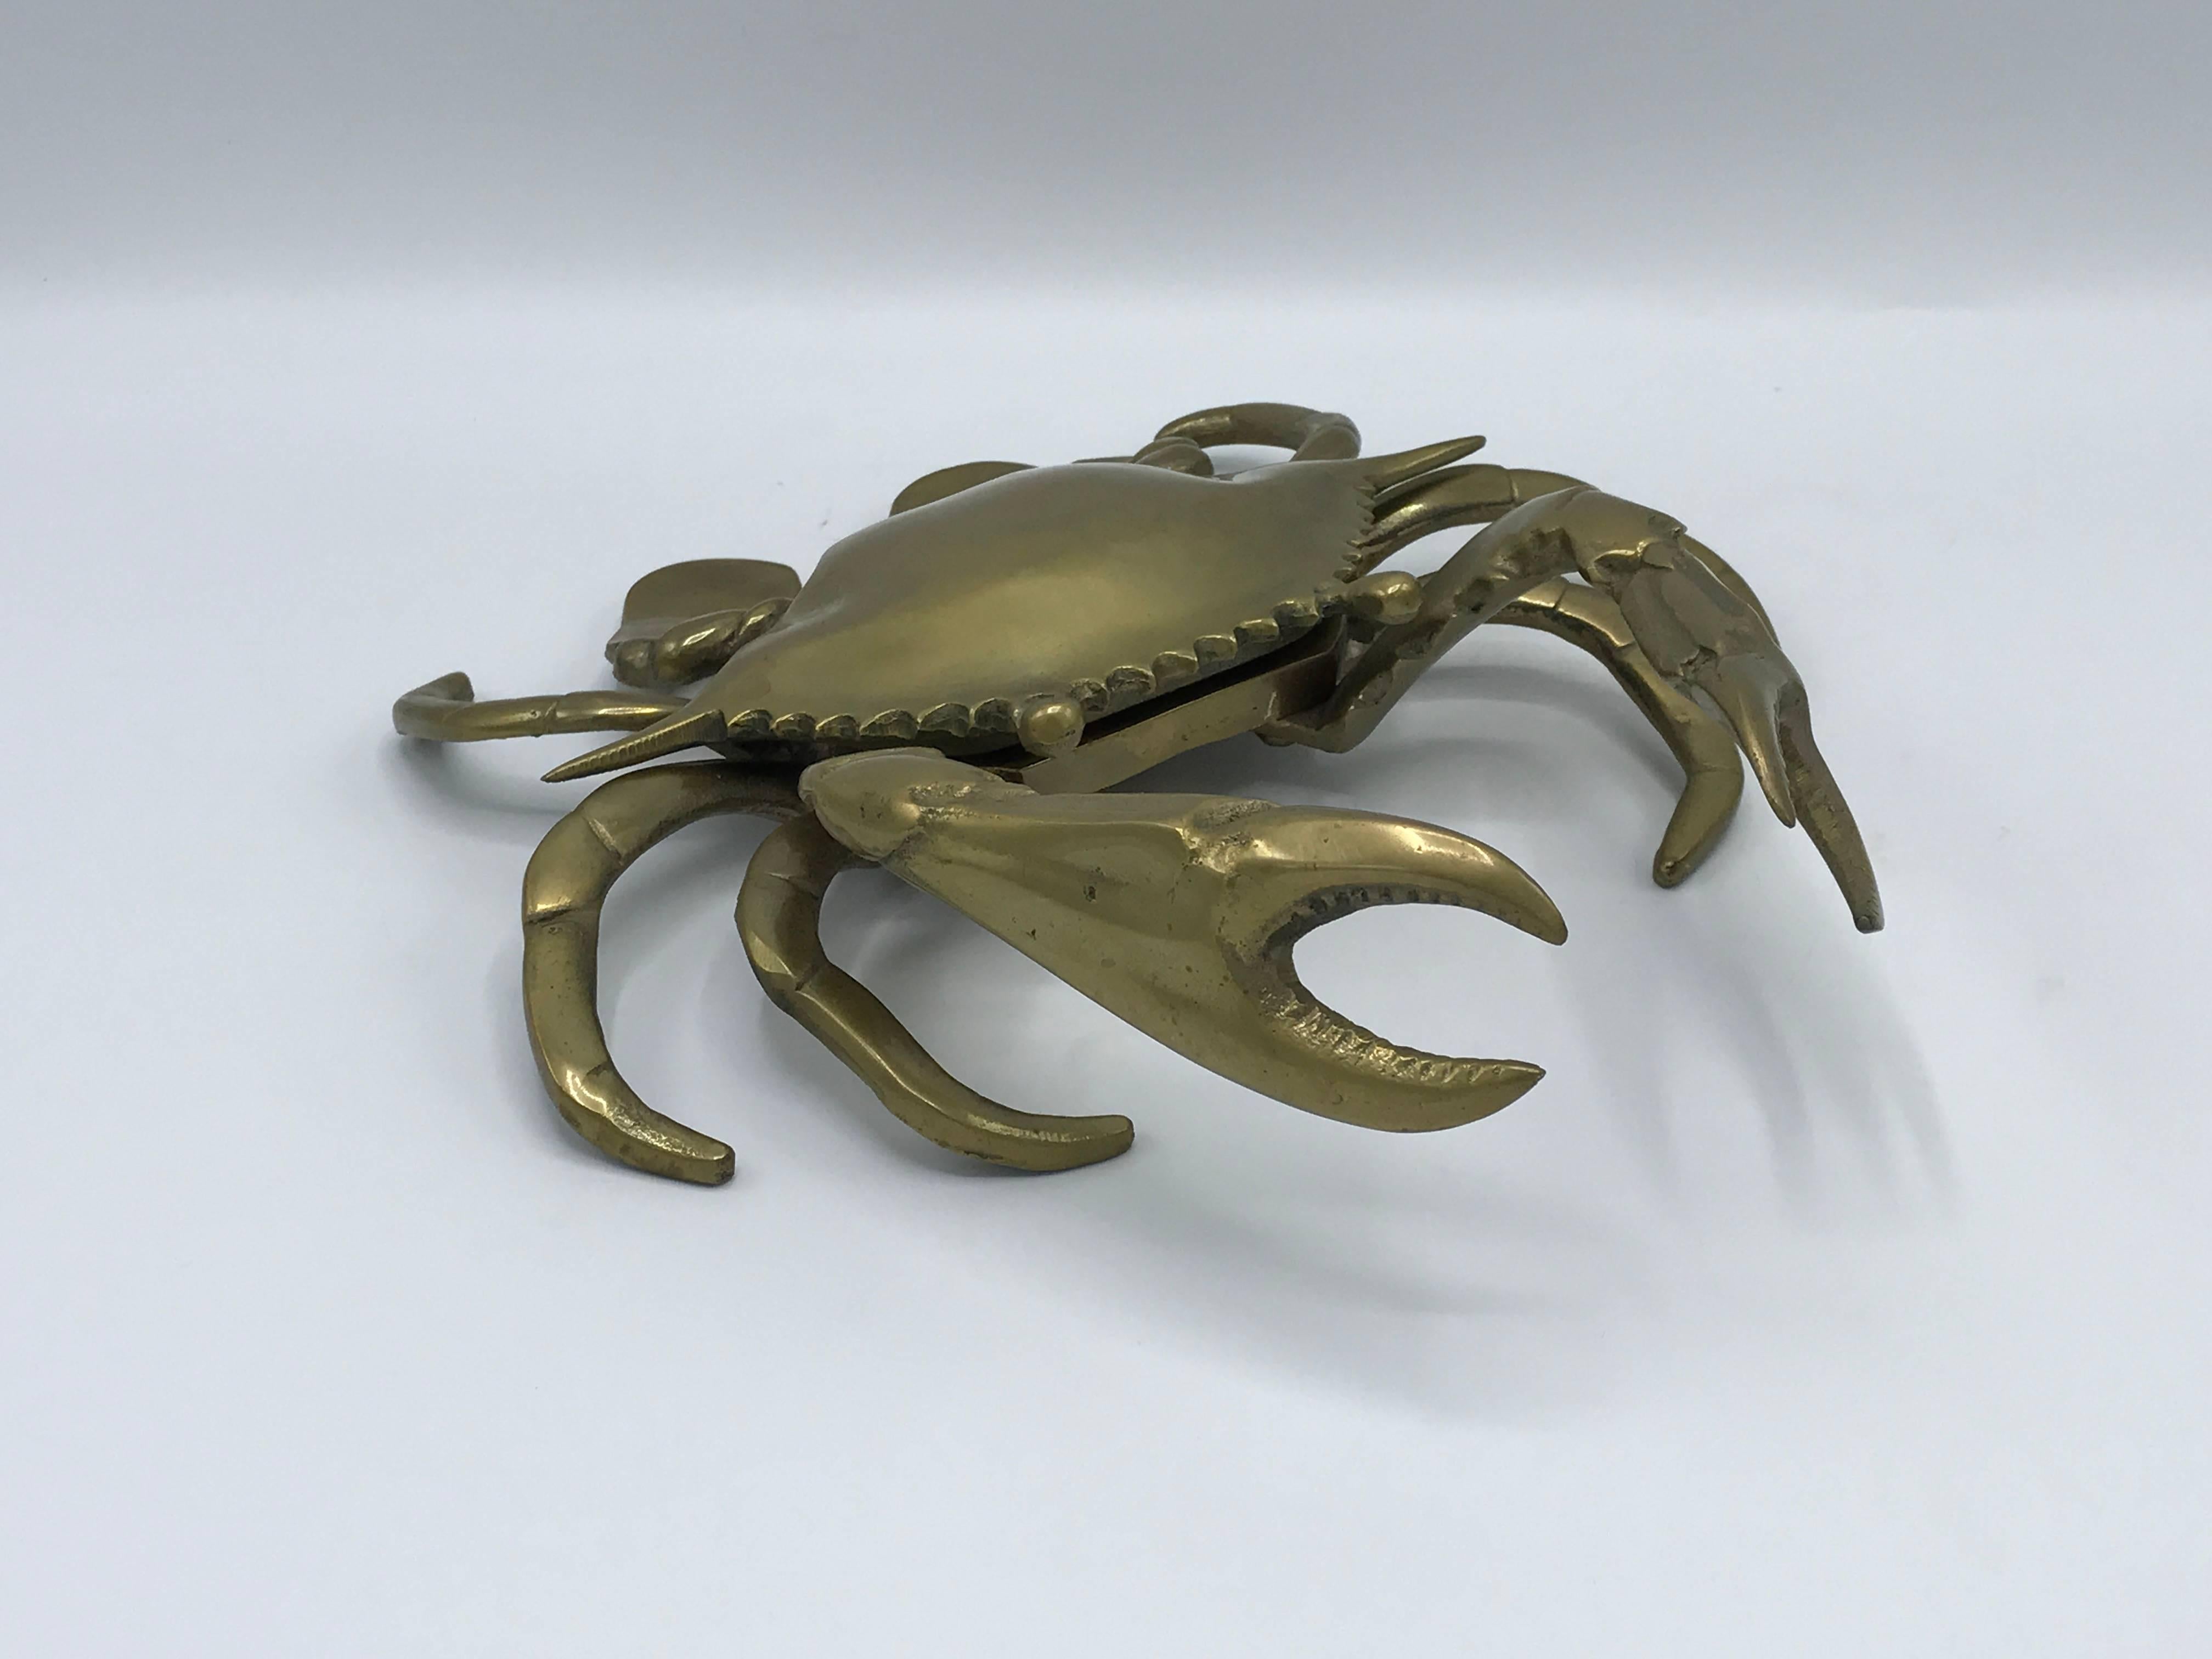 Offered is a beautiful, 1960s oversized solid-brass crab ashtray with a hinged lid.